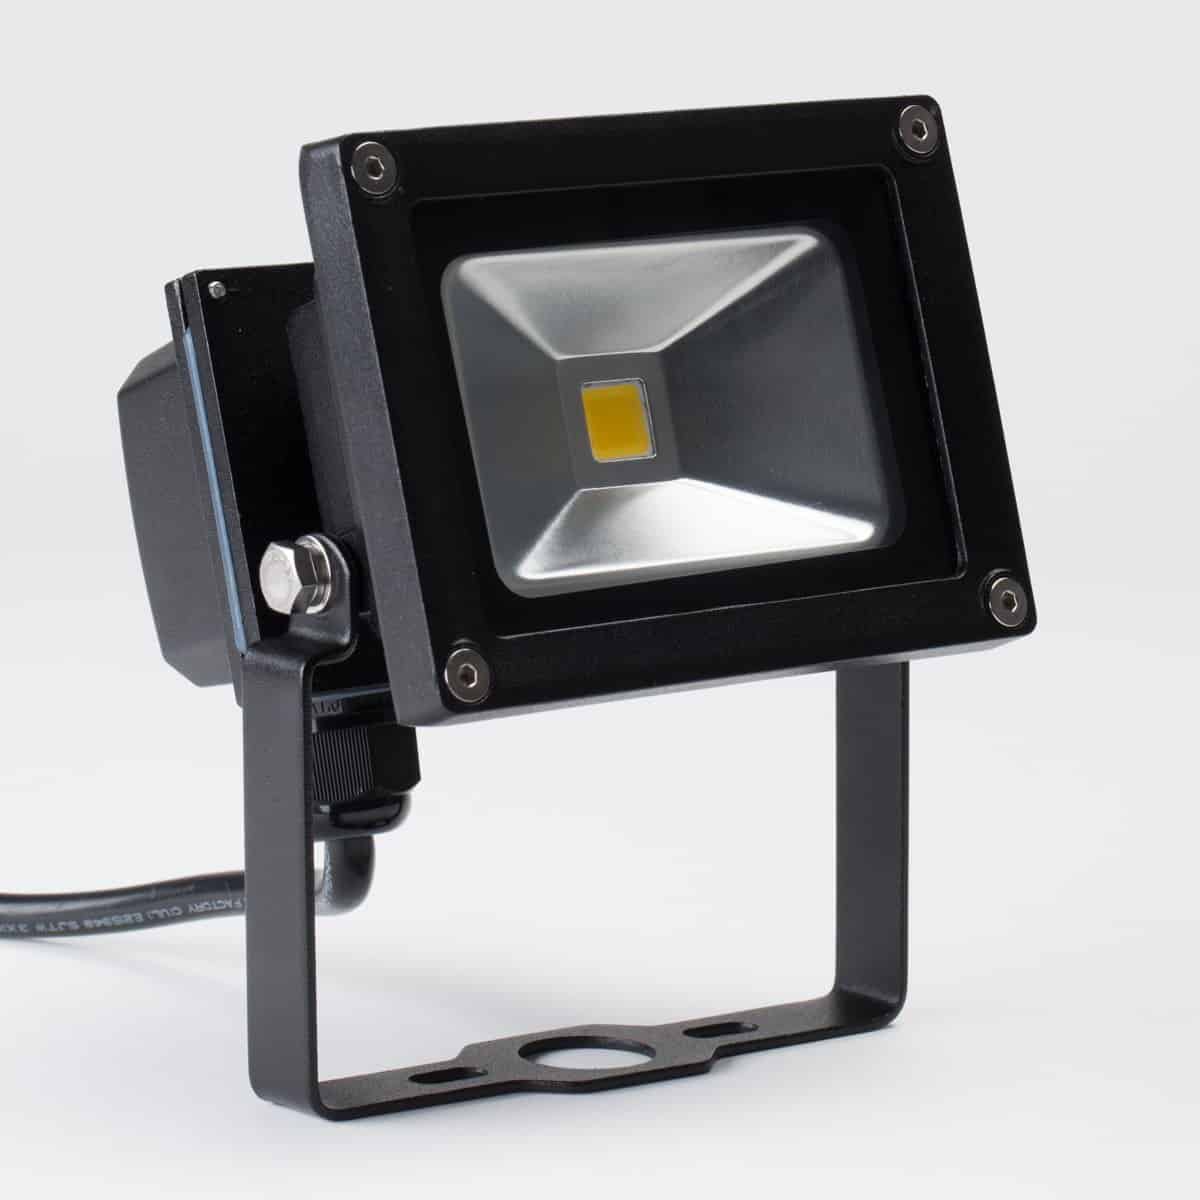 Load image into Gallery viewer, small led flood light in black housing with mounting bracket and yellow chip in center
